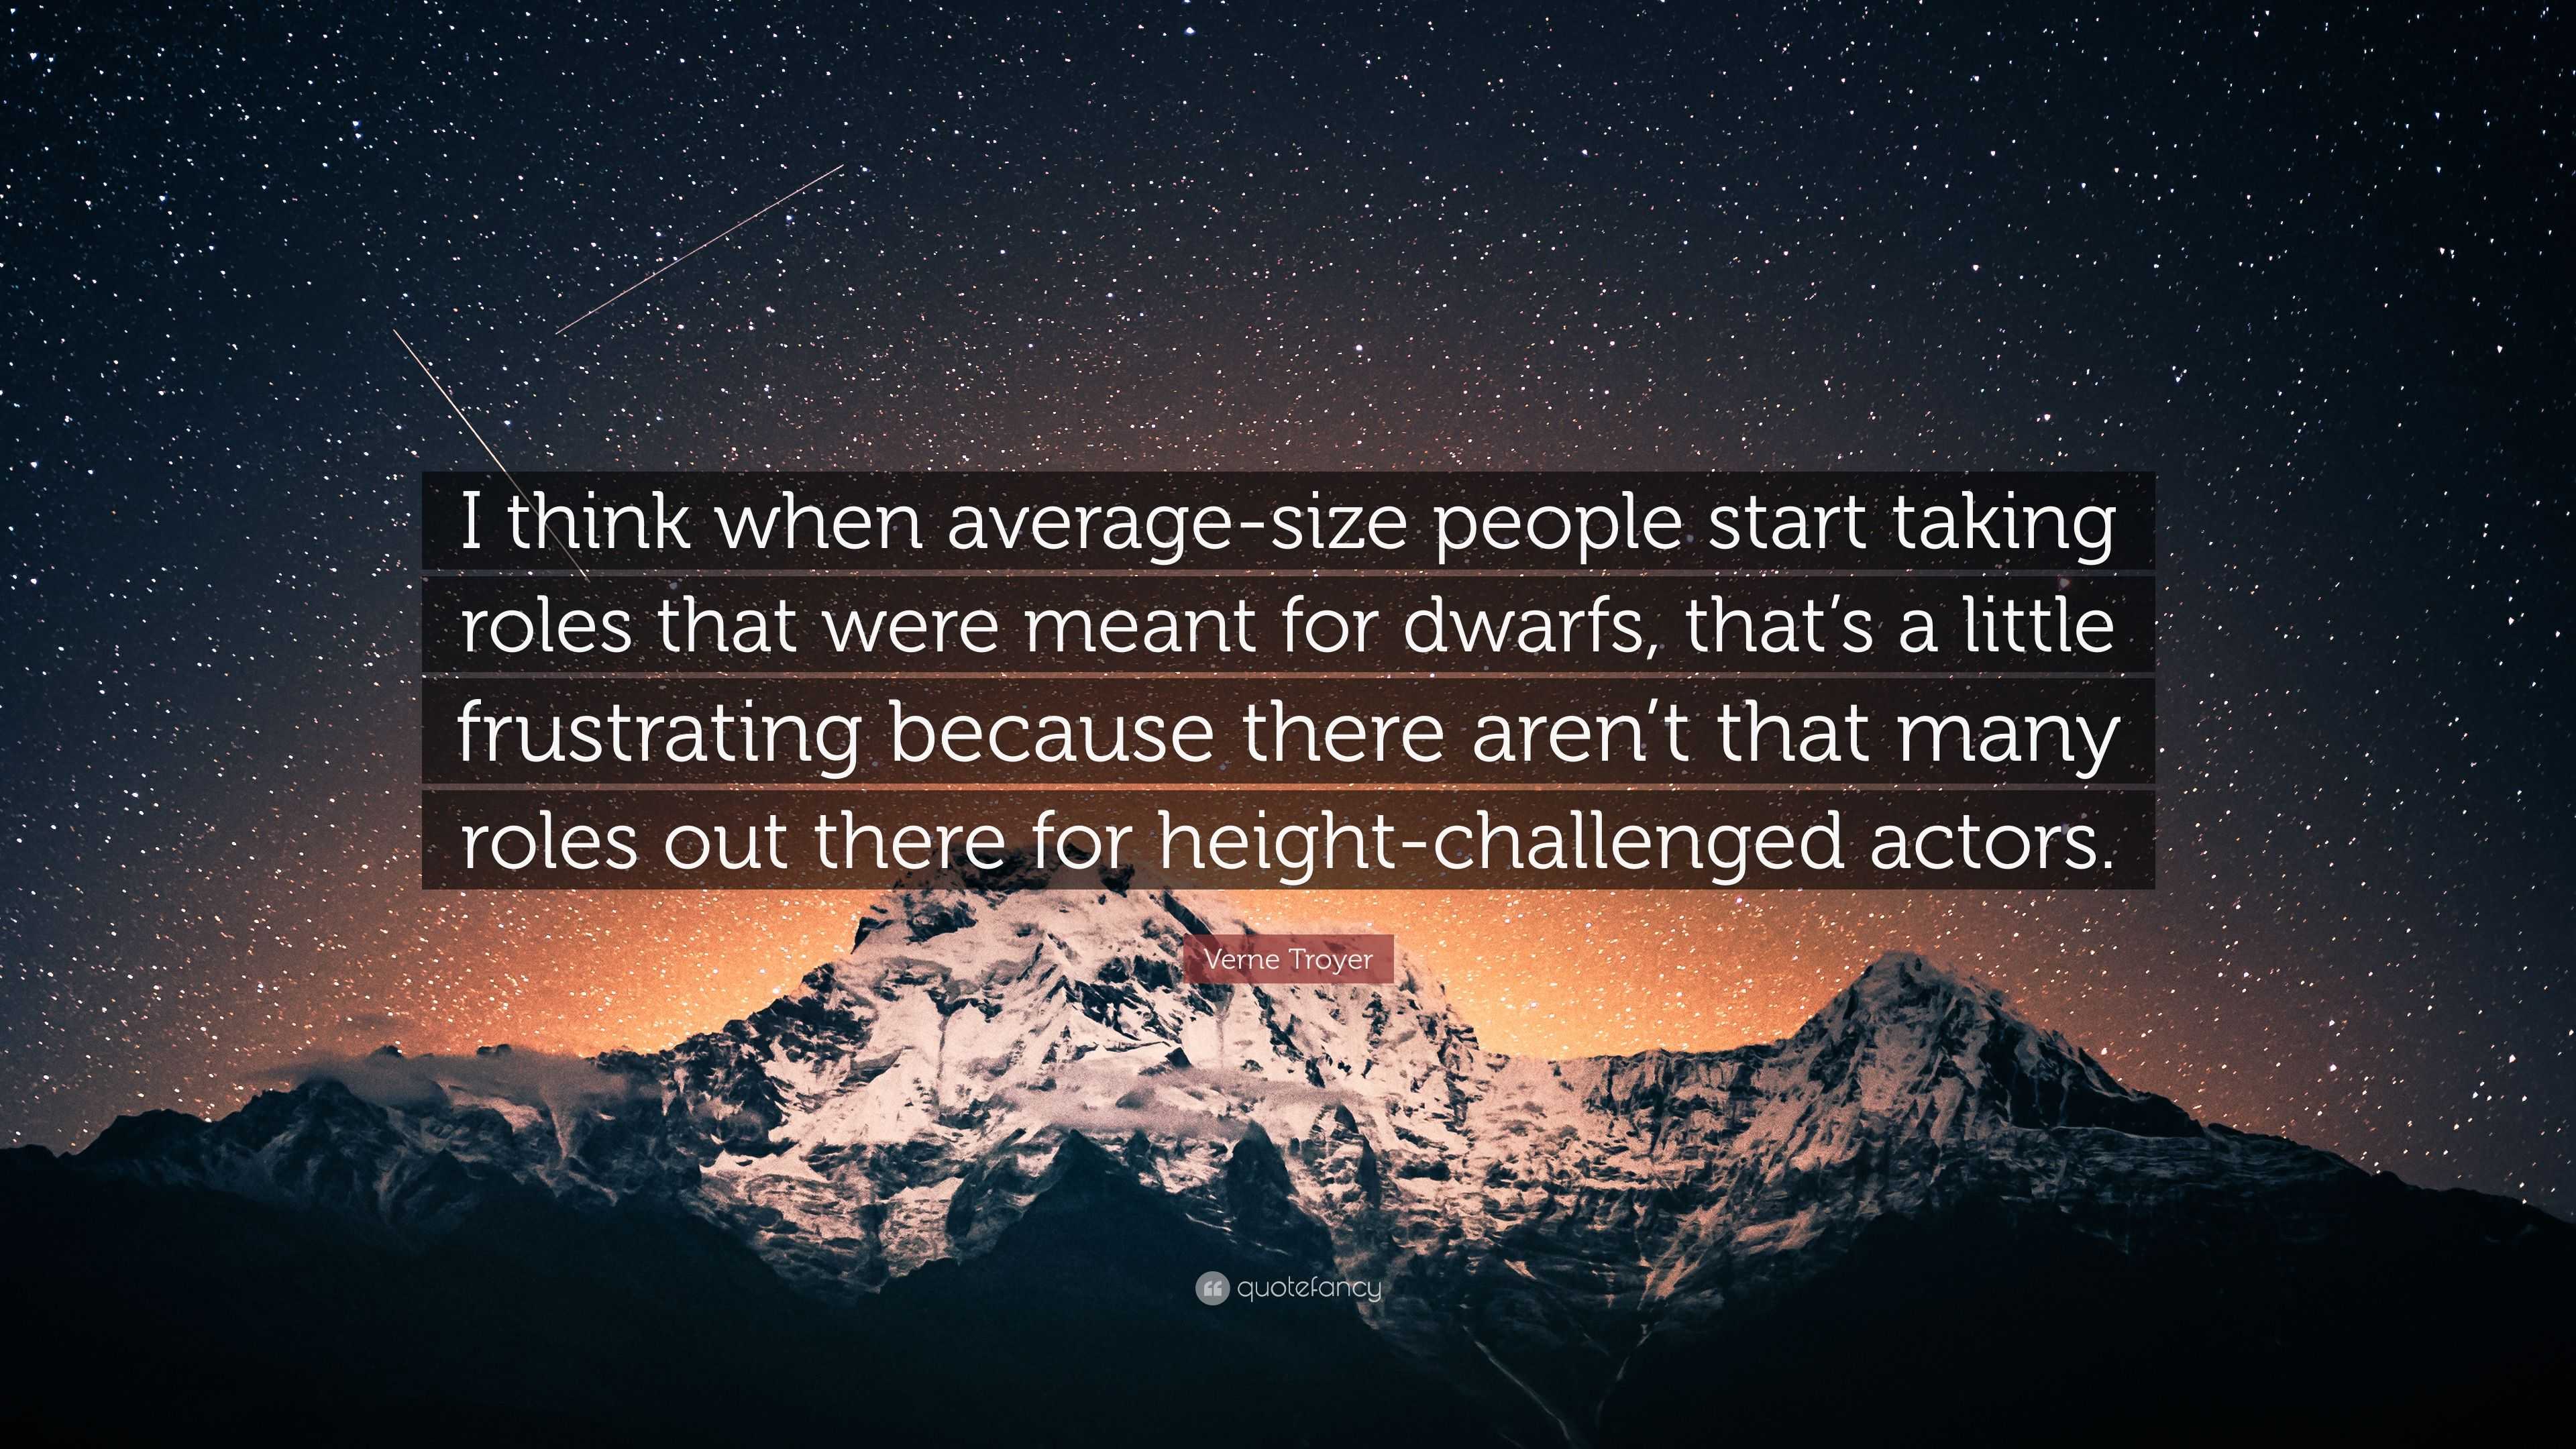 Verne Troyer Quote: “I think when average-size people start taking roles  that were meant for dwarfs, that's a little frustrating because ther...”